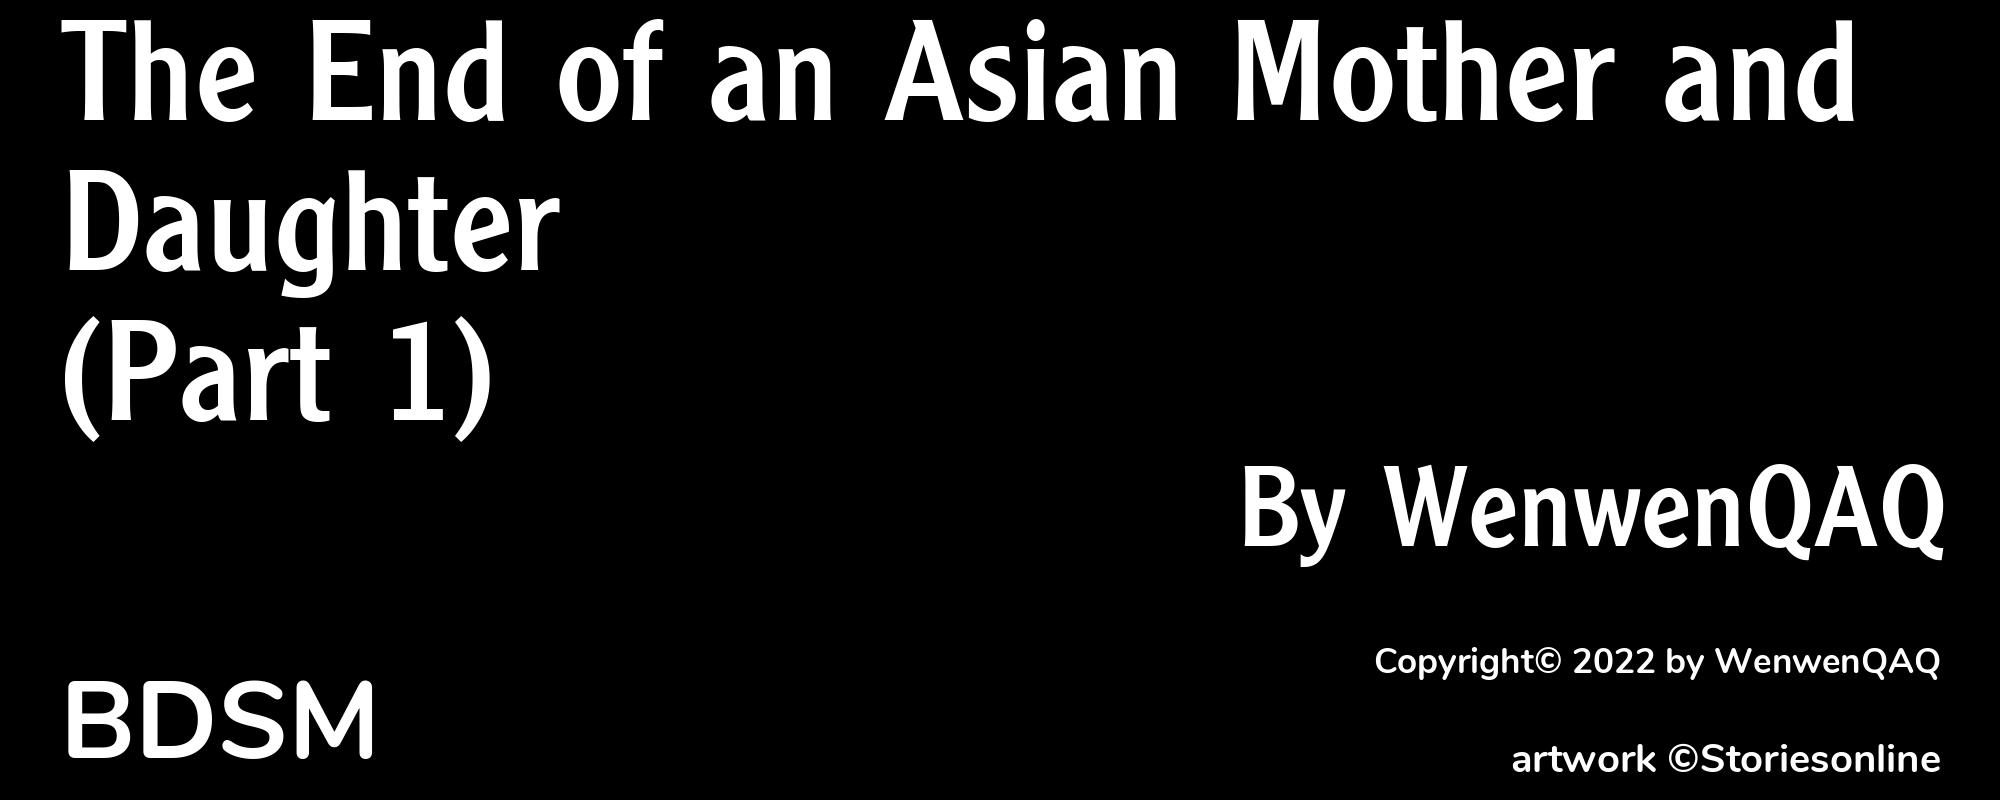 The End of an Asian Mother and Daughter (Part 1) - Cover